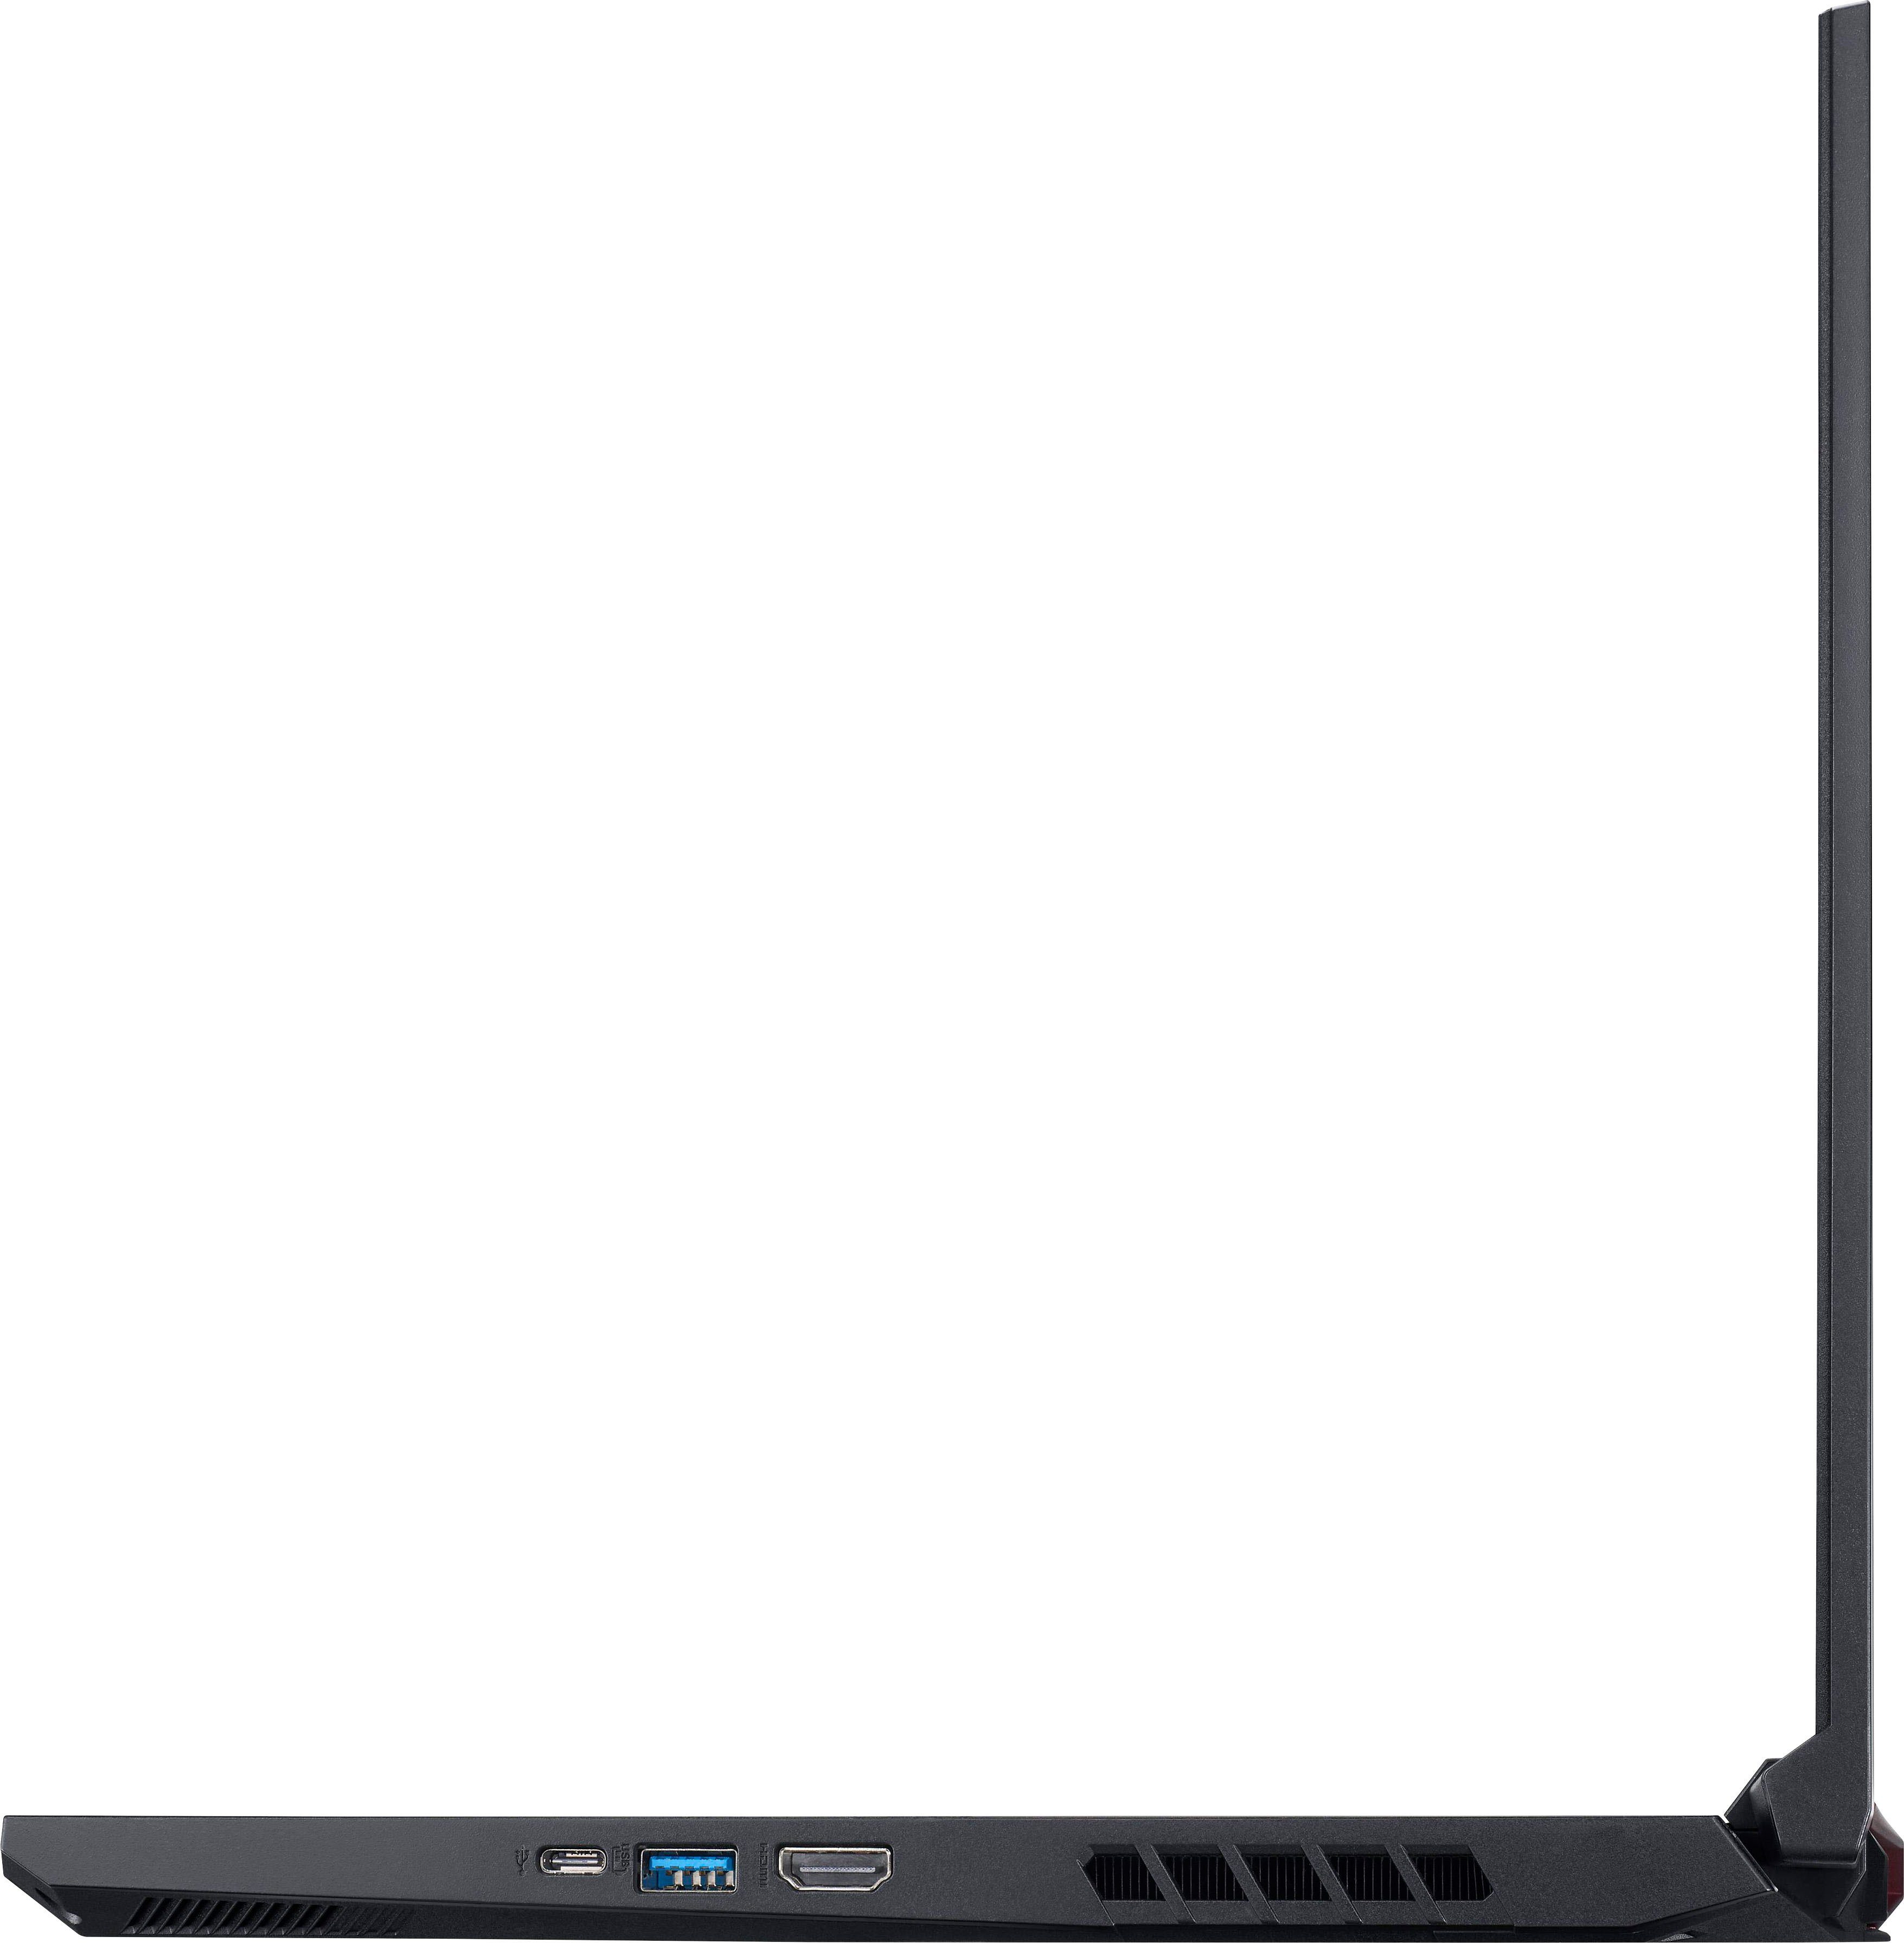 Acer Nitro 5 cm/15,6 3060, i7 10750H, 512 (39,62 Core RTX Intel GeForce SSD) GB Zoll, Gaming-Notebook AN515-55-766W